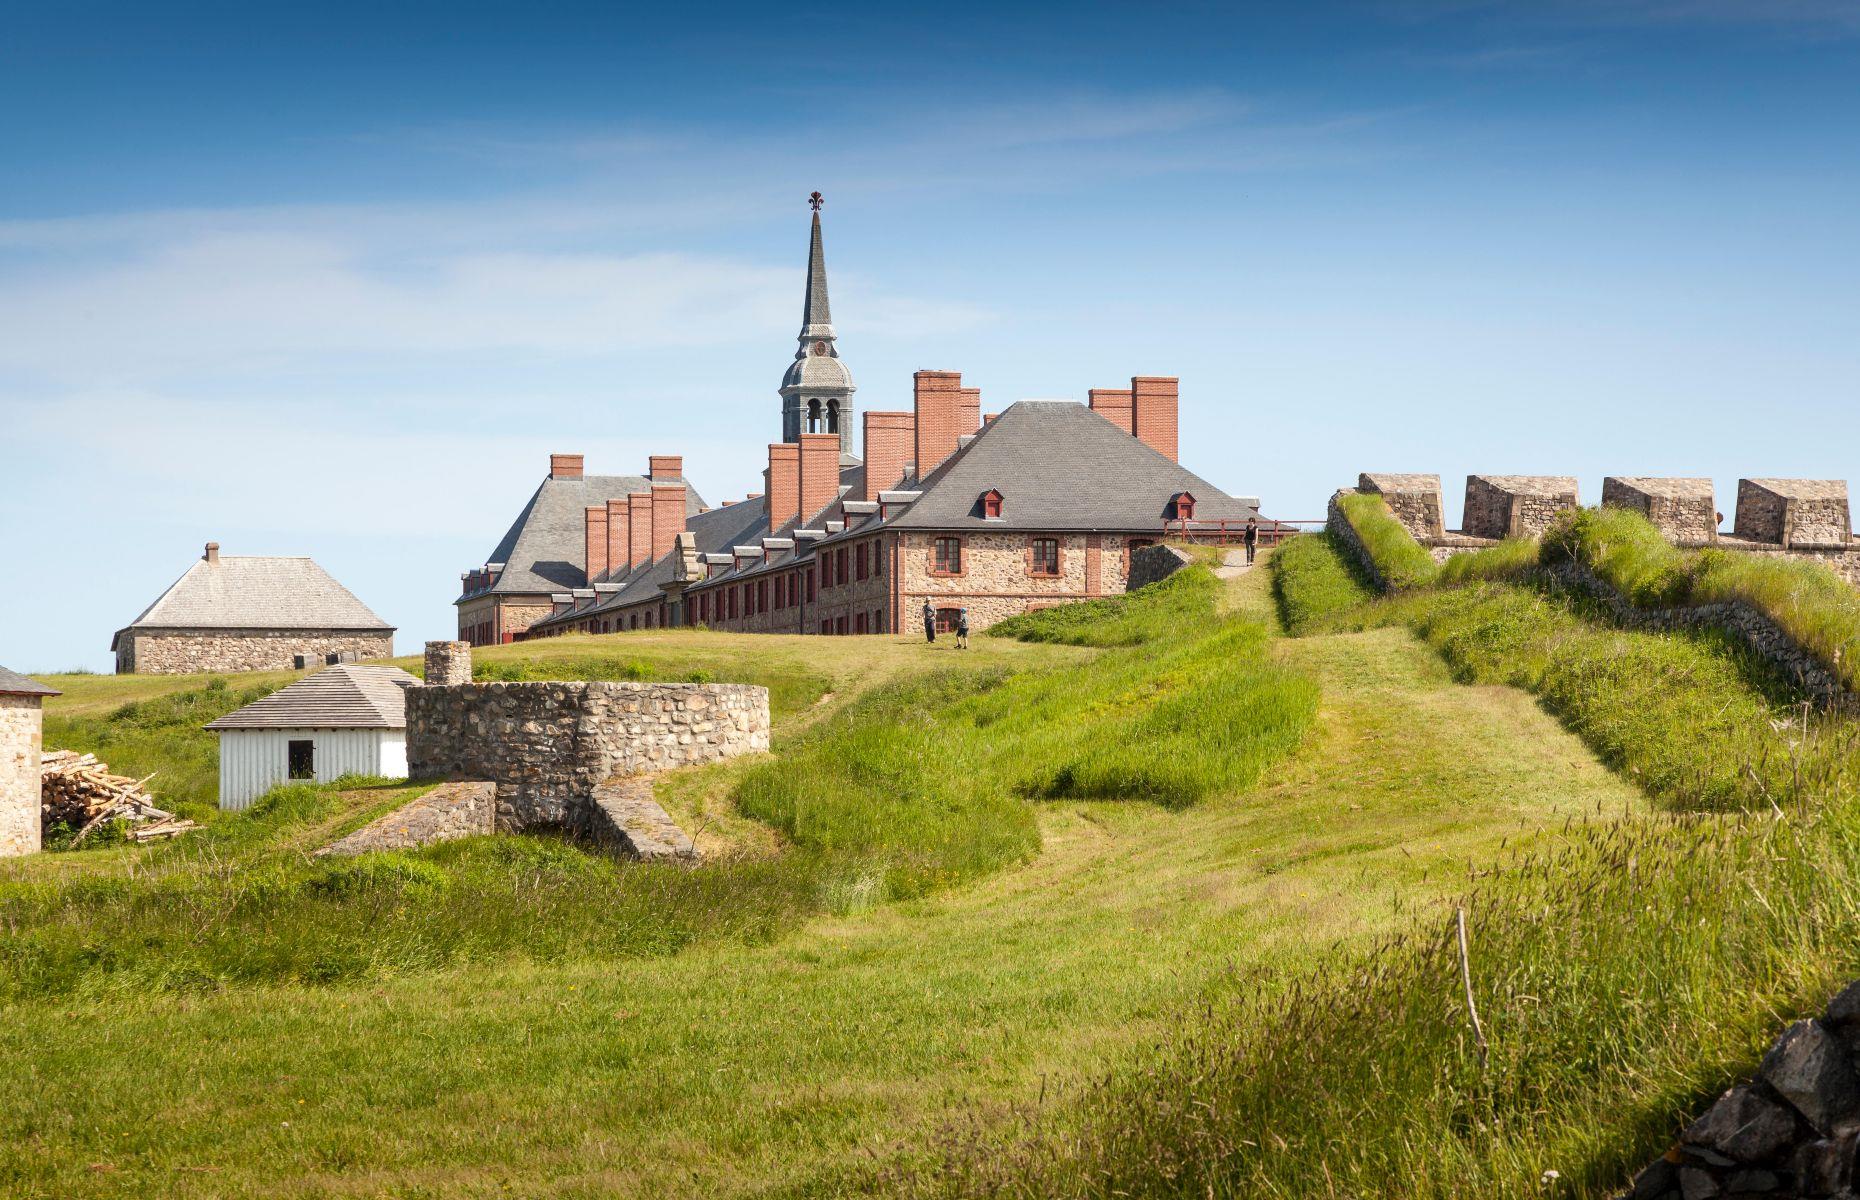 <p>The 18th-century French fort at Louisbourg is perched precariously atop Rochefort Point and often endures vicious Atlantic weather. After Storm Fiona hit the area in September 2022, archaeologists found that the skeletal remains of two people had been exposed in the fortress burial ground, and were at risk of washing into the sea.</p>  <p>They rushed to save the bodies from the waves and sent them for scientific analysis, though they’ll eventually be reburied in a safer part of the cemetery.</p>